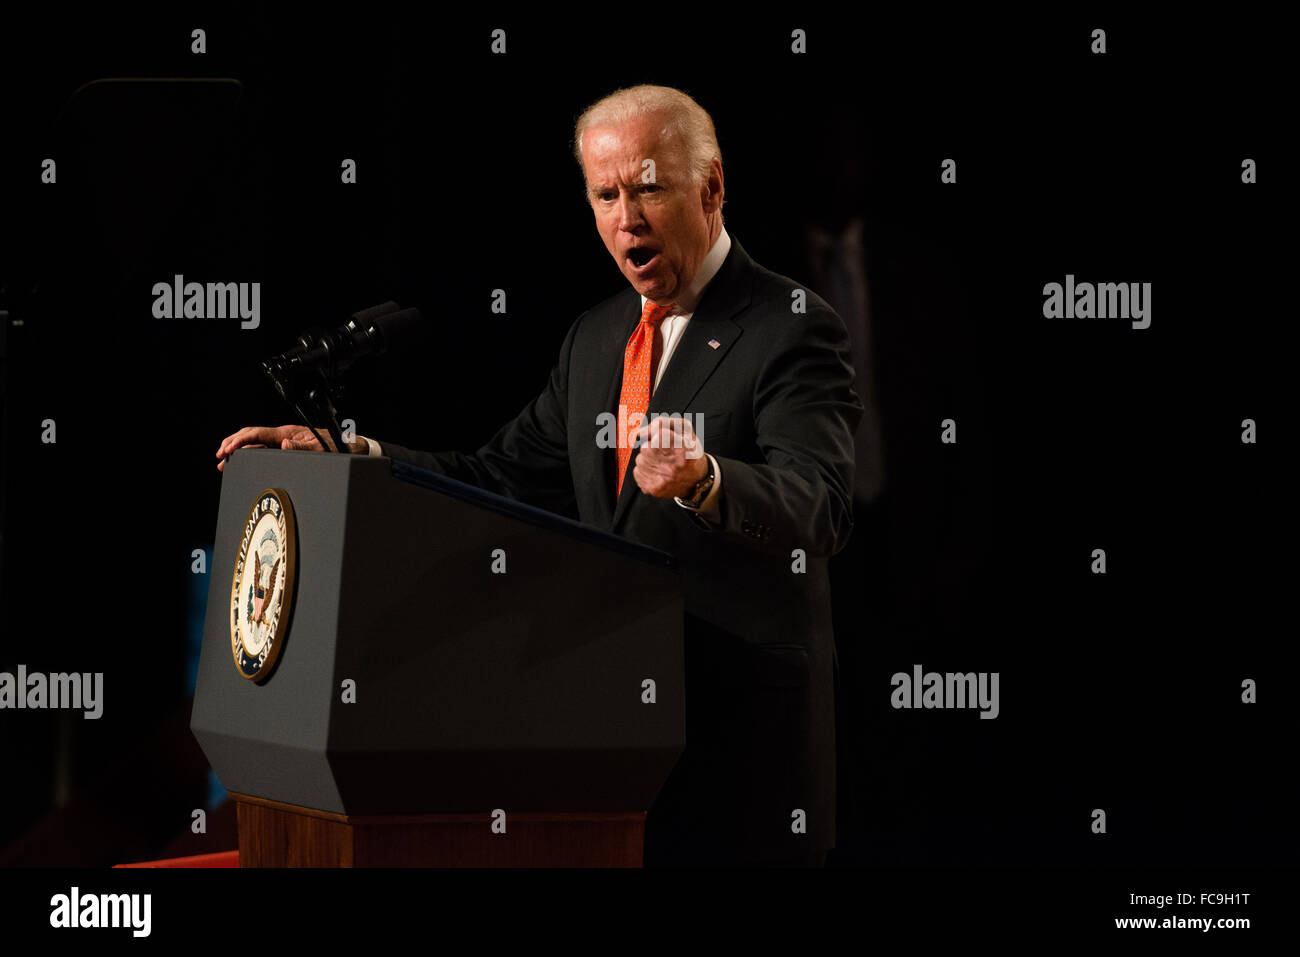 The Vice President of the United States Joe Biden speaks to a crowd at Syracuse University about campus sexual assaults. Stock Photo